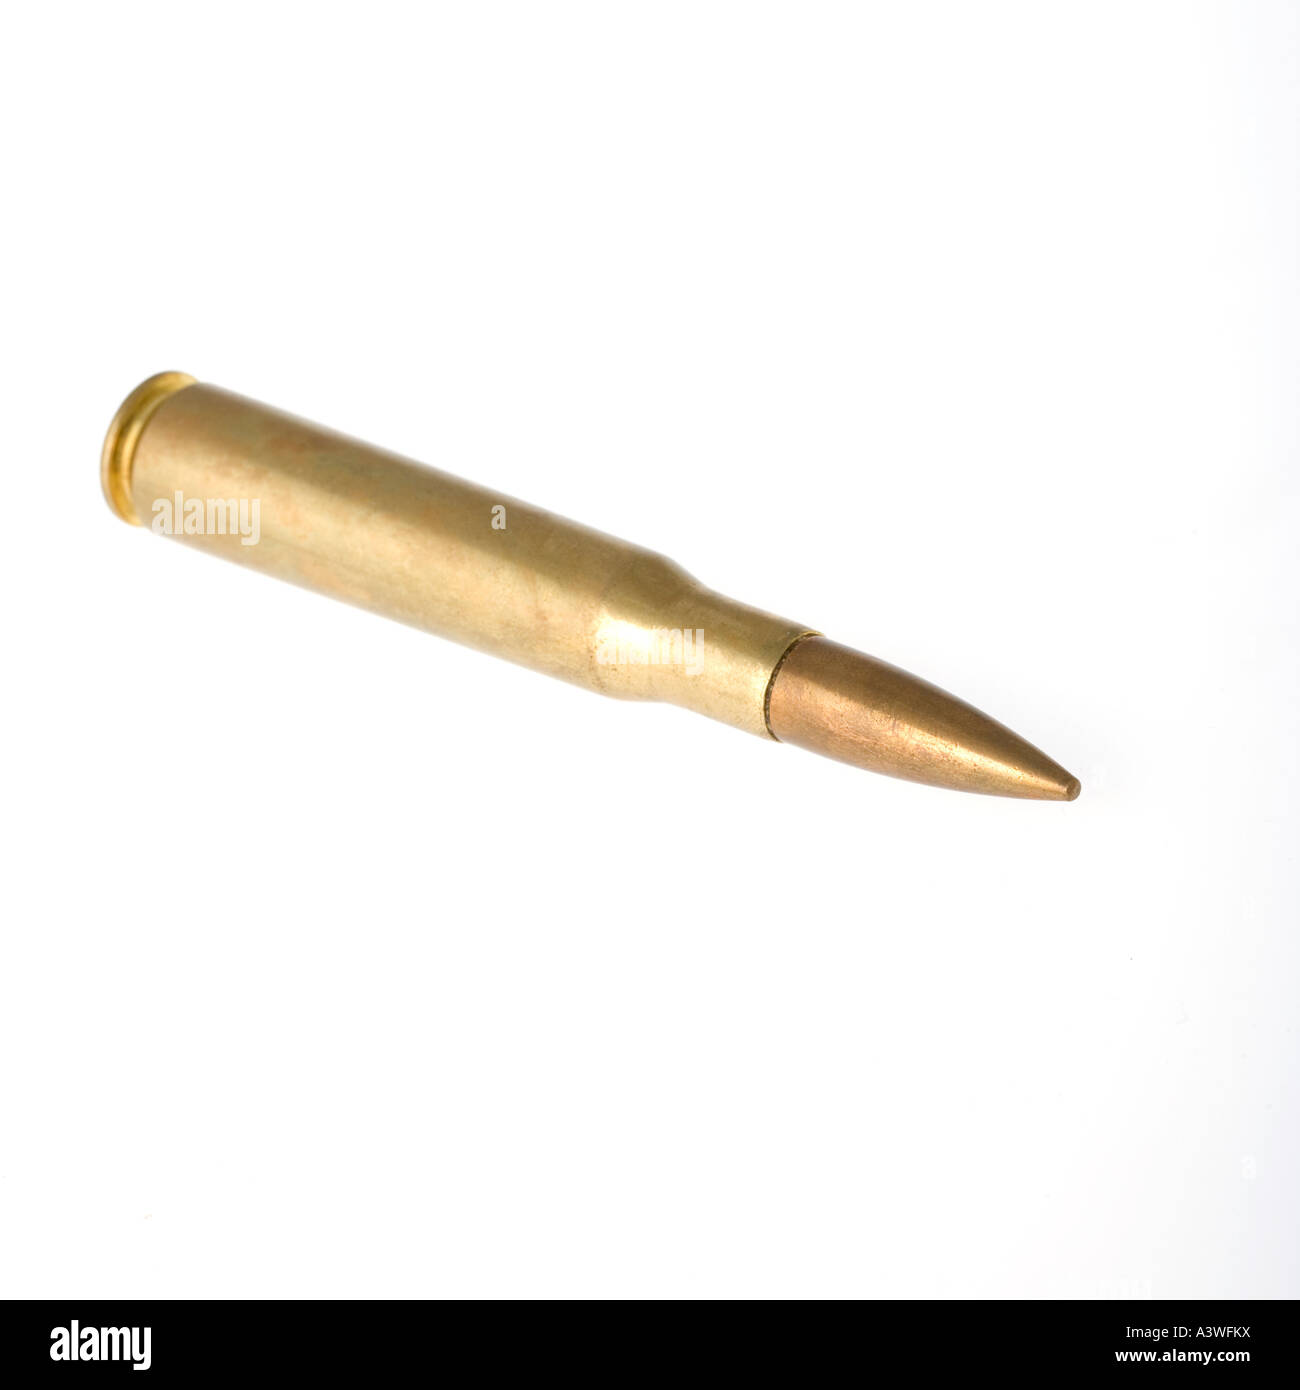 A massive 50 Caliber bullet on a white background. War and Armed Conflict concepts. Stock Photo